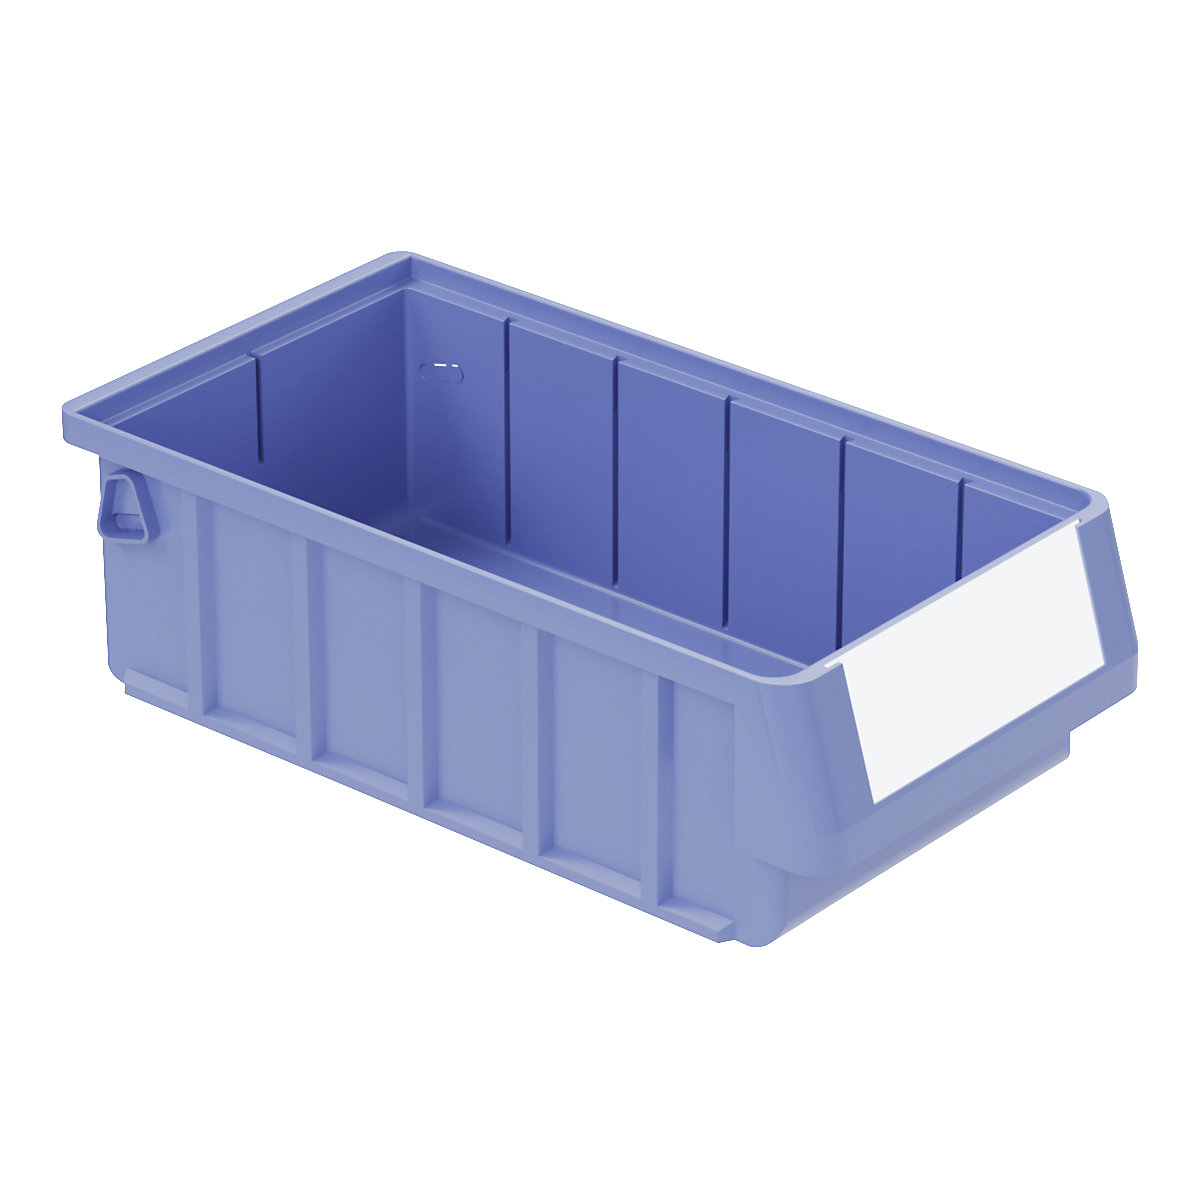 Shelf bin – BITO, made of PP, LxWxH 300 x 156 x 90 mm, pack of 12-12